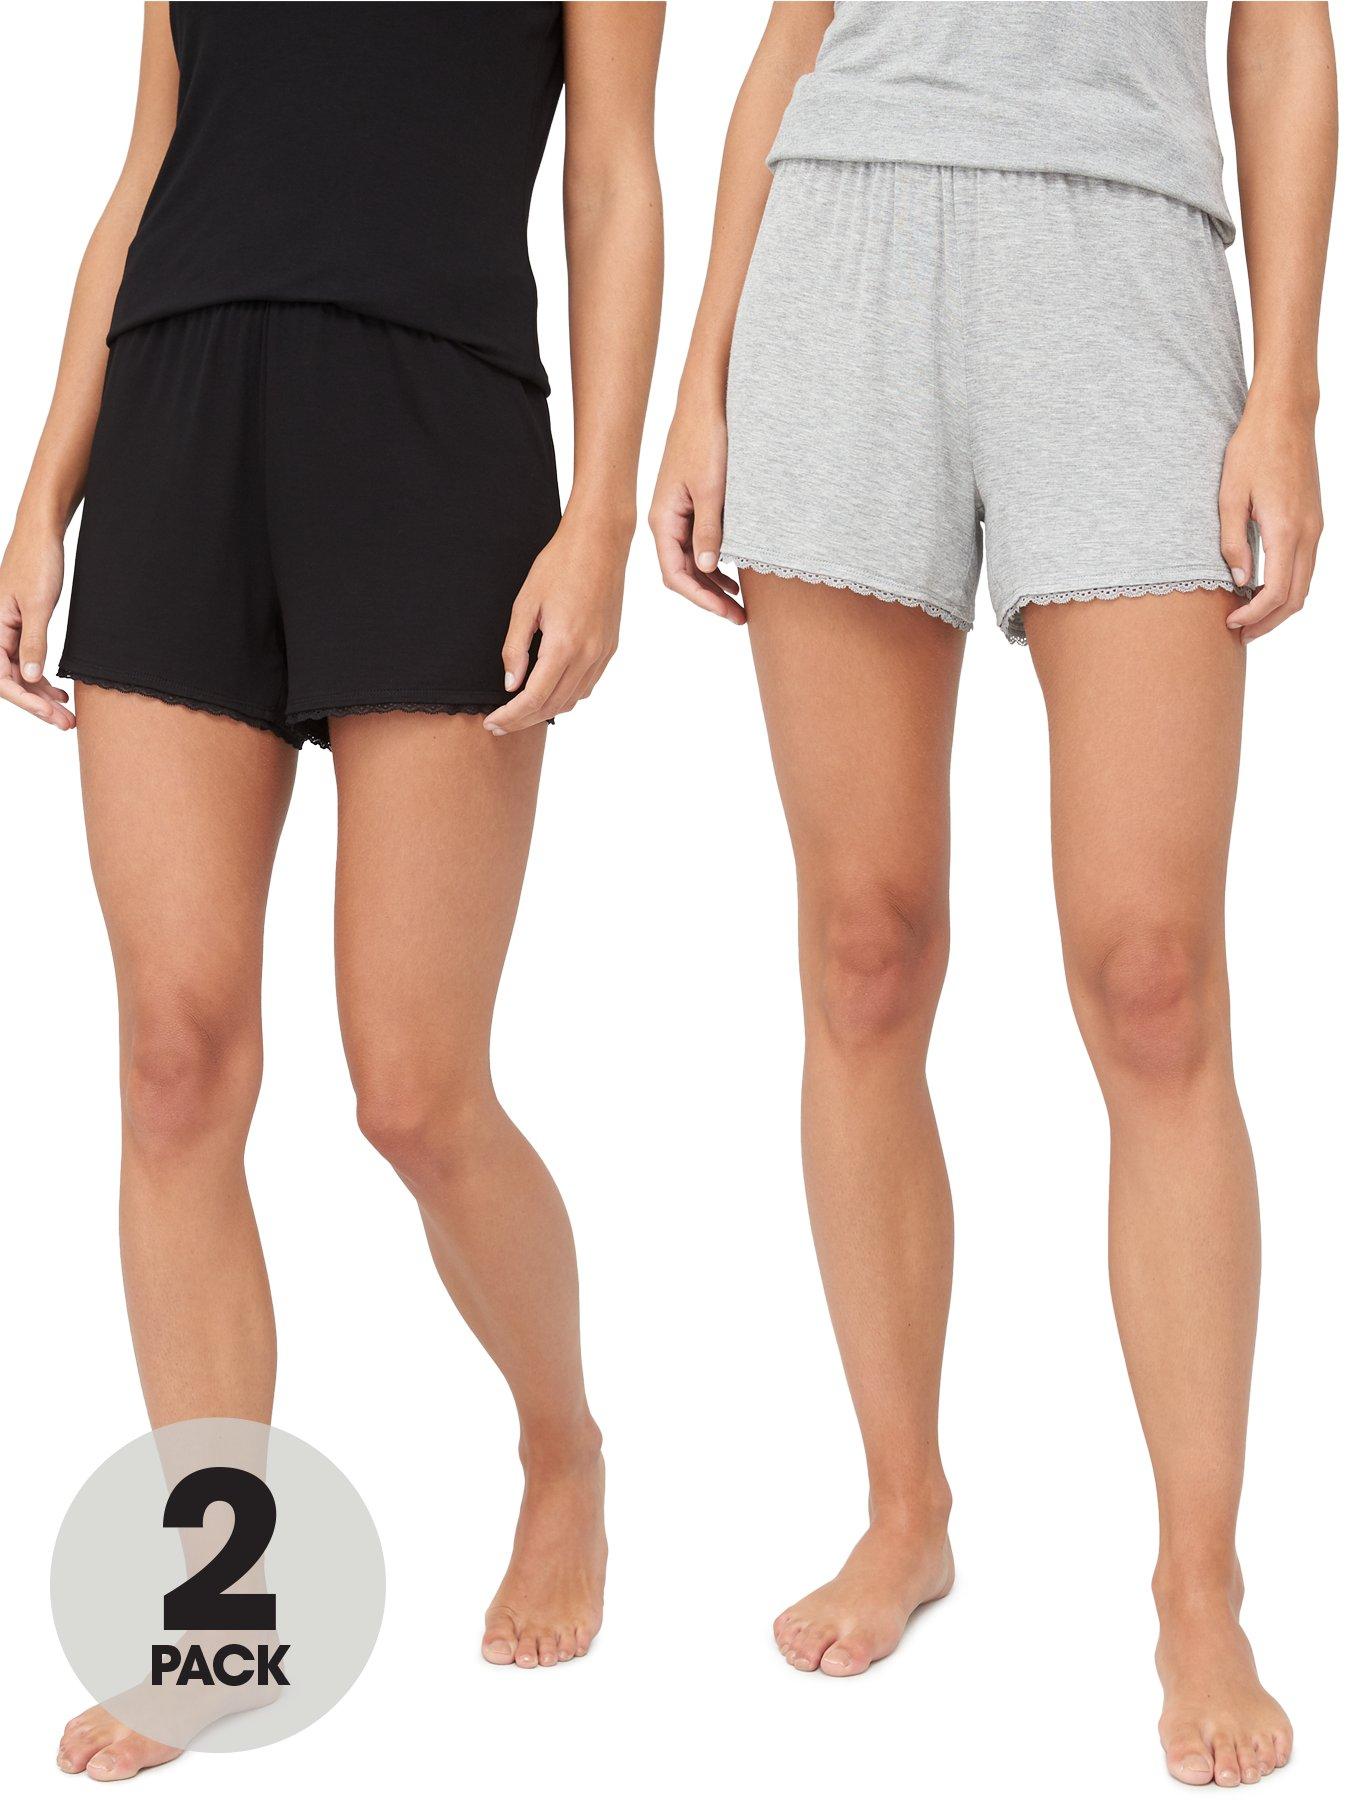 Satin Lace-Trimmed  Shorts Details about   I.n.c